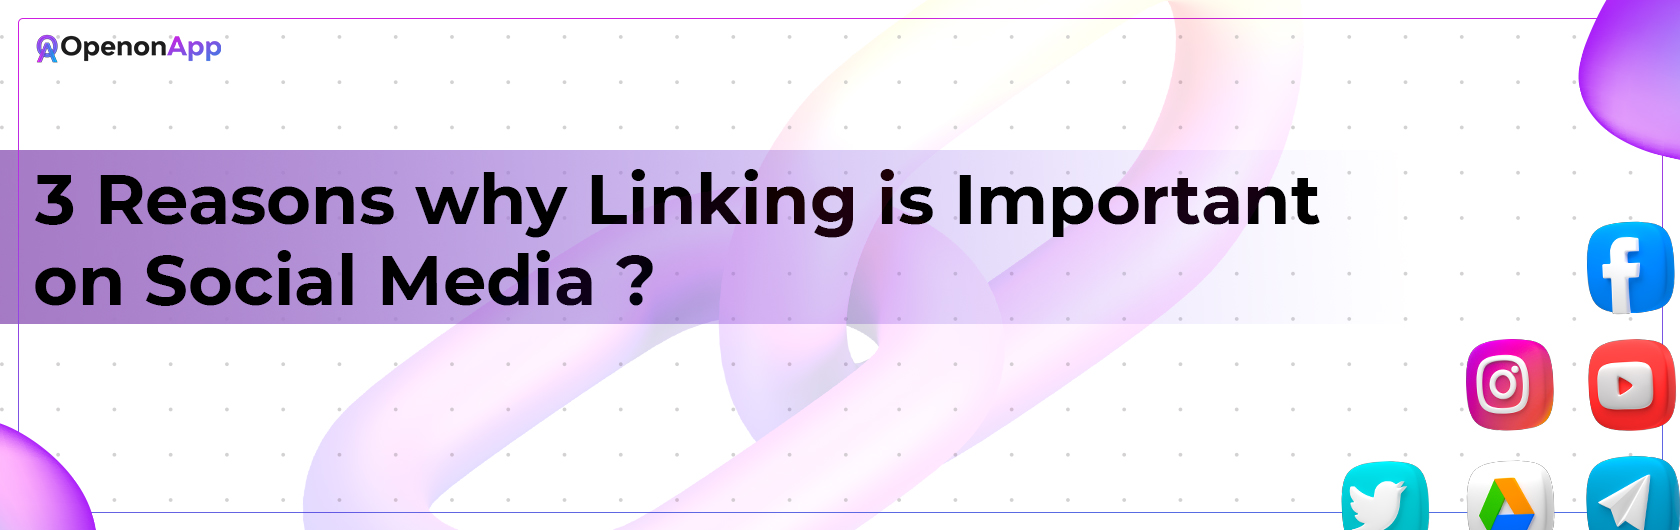 why linking is important on social media